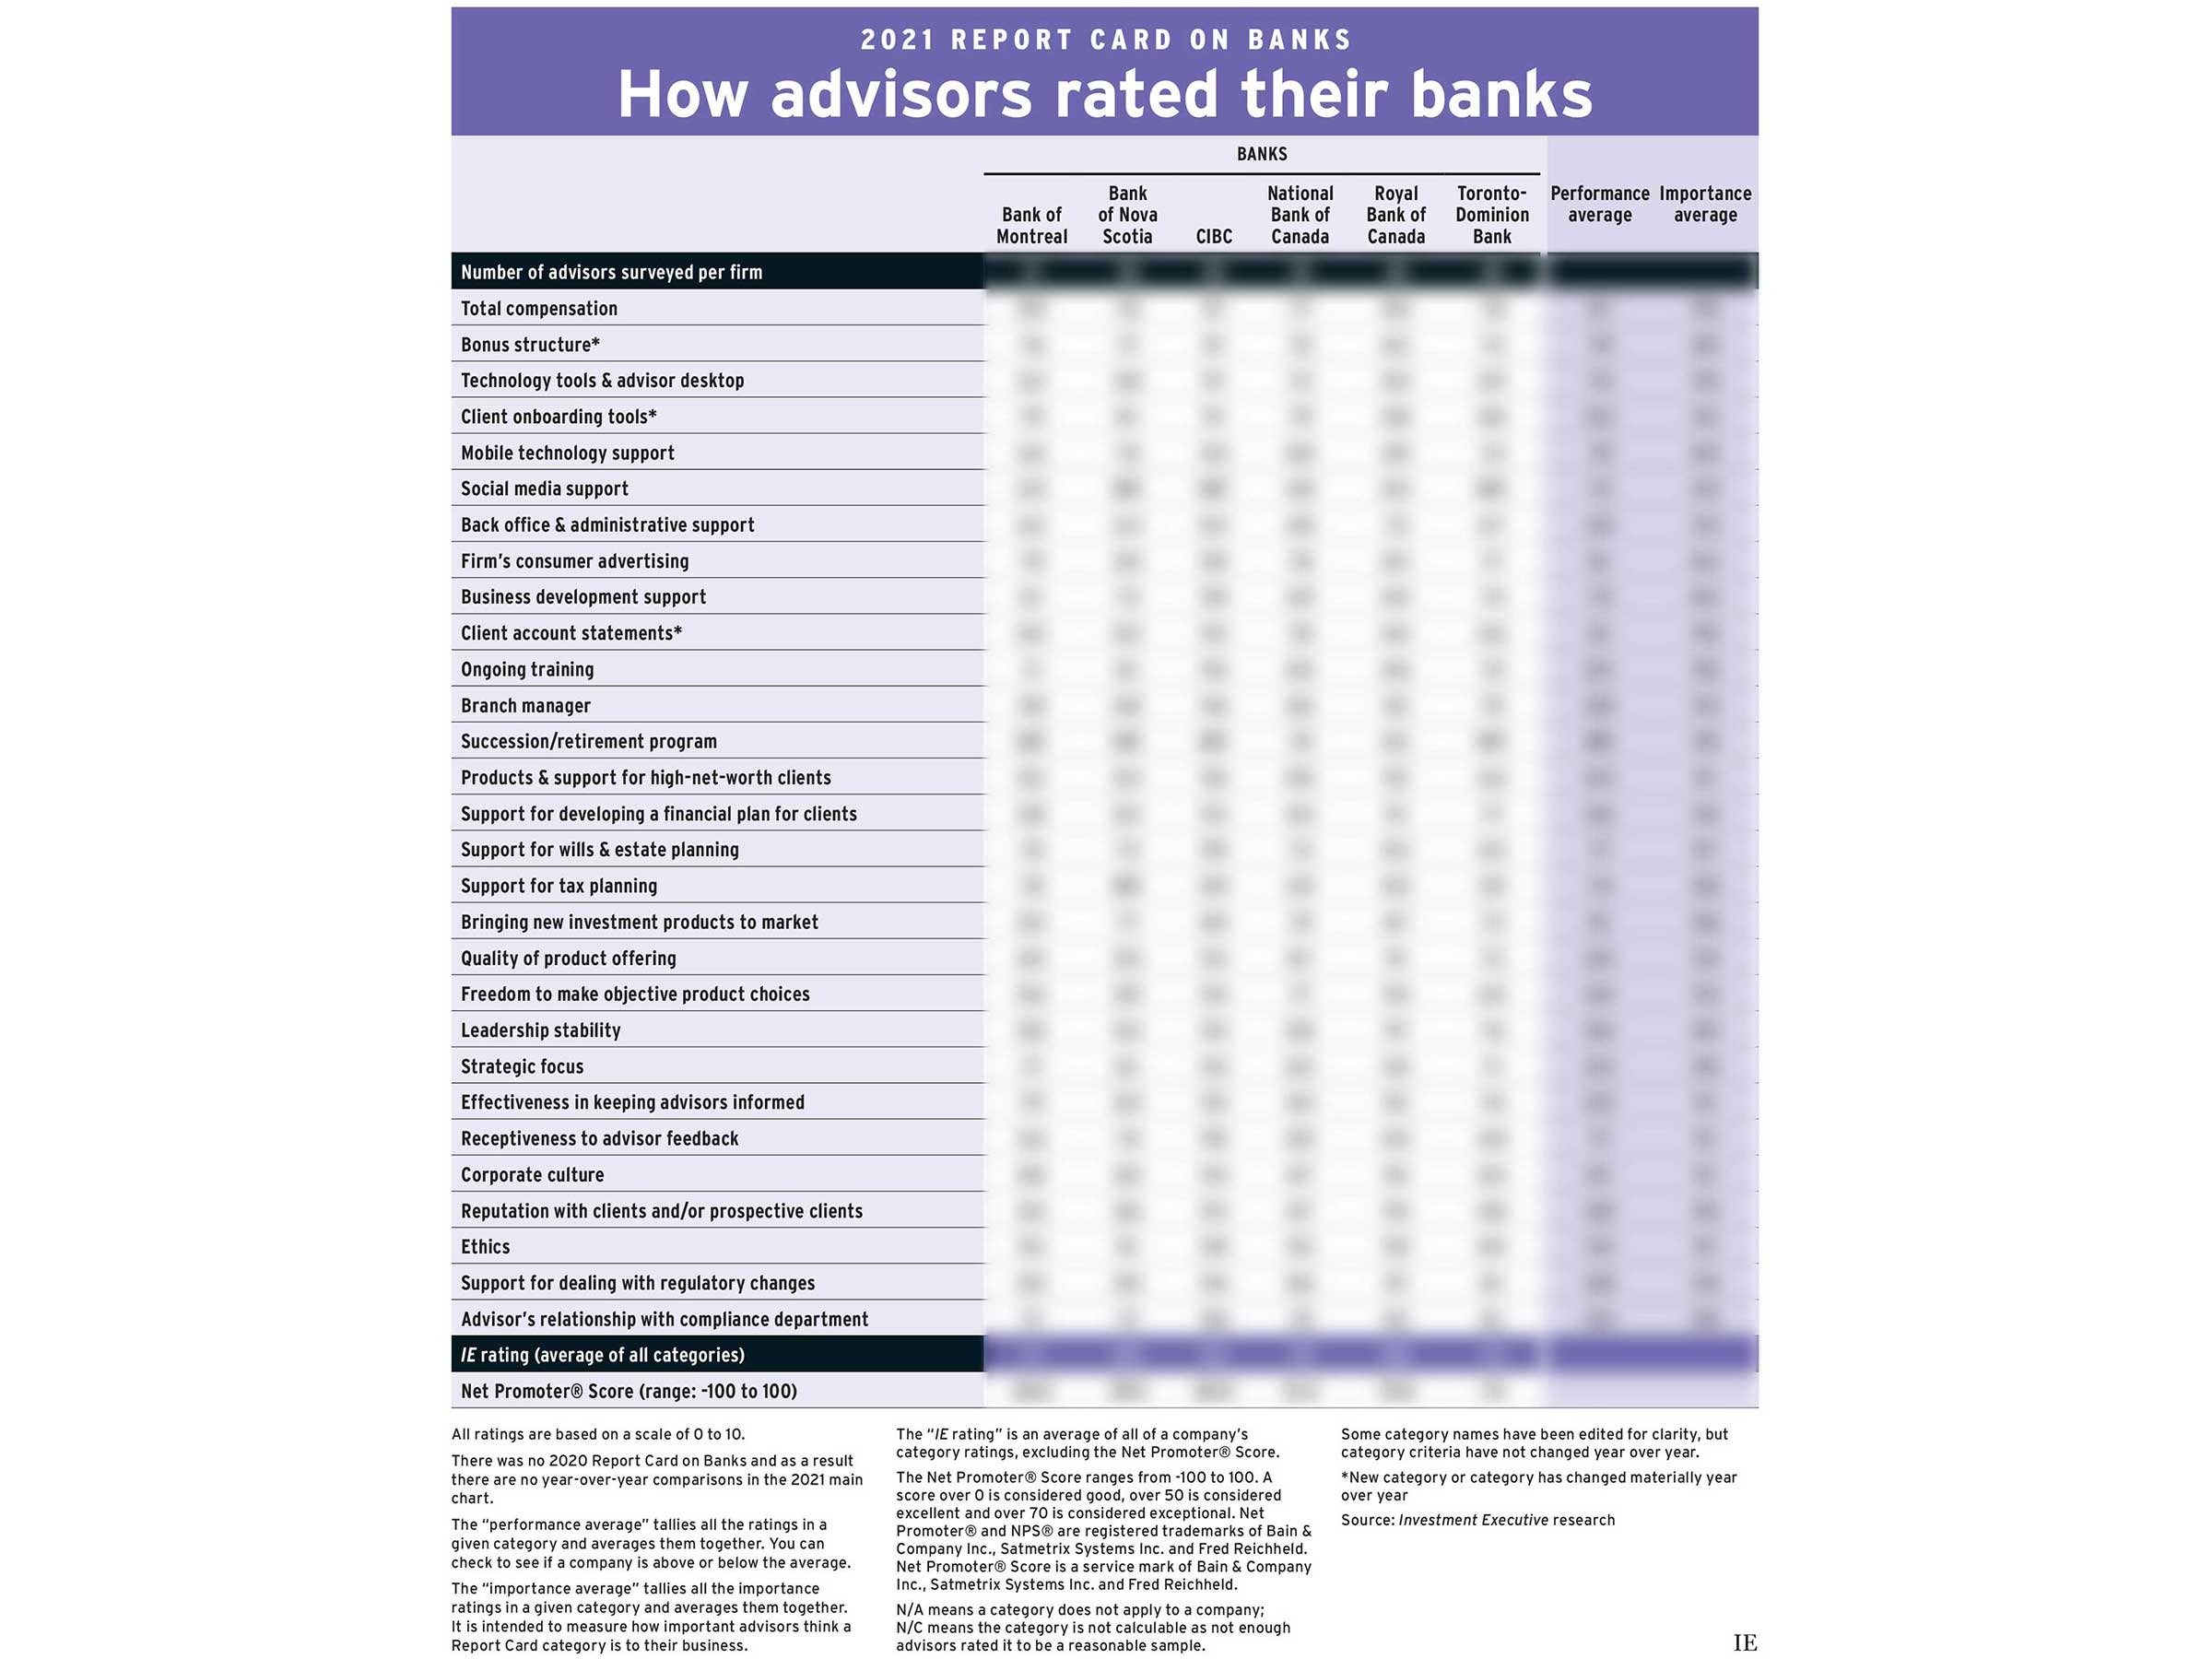 Report Card on Banks main chart - blurry